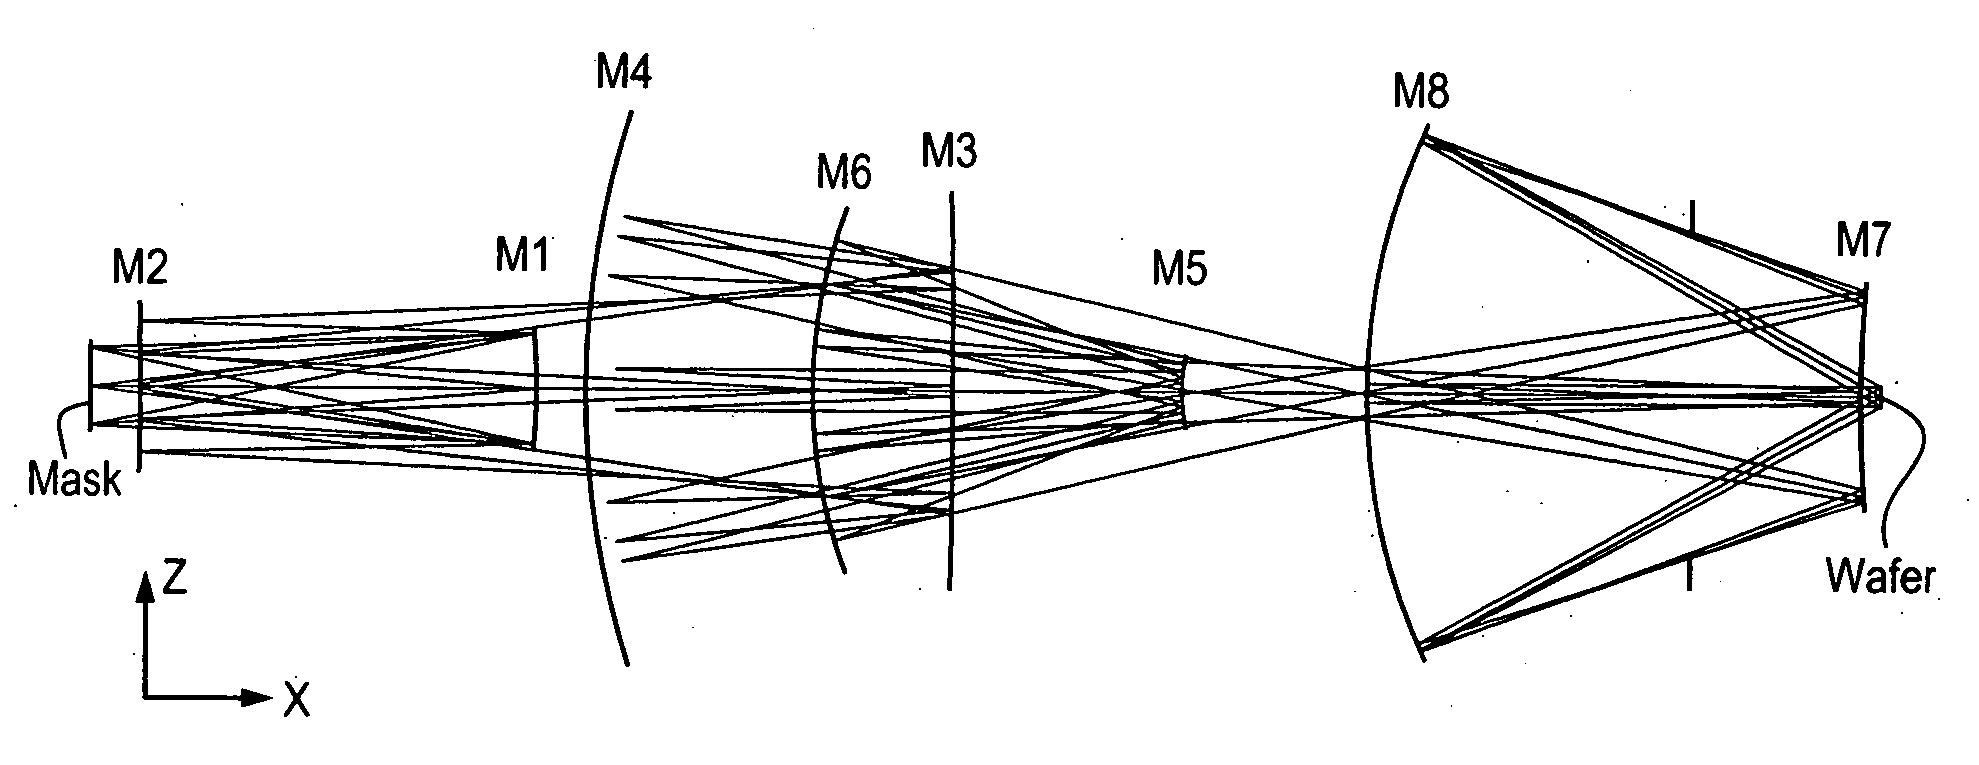 Reflective optical system for a photolithography scanner field projector